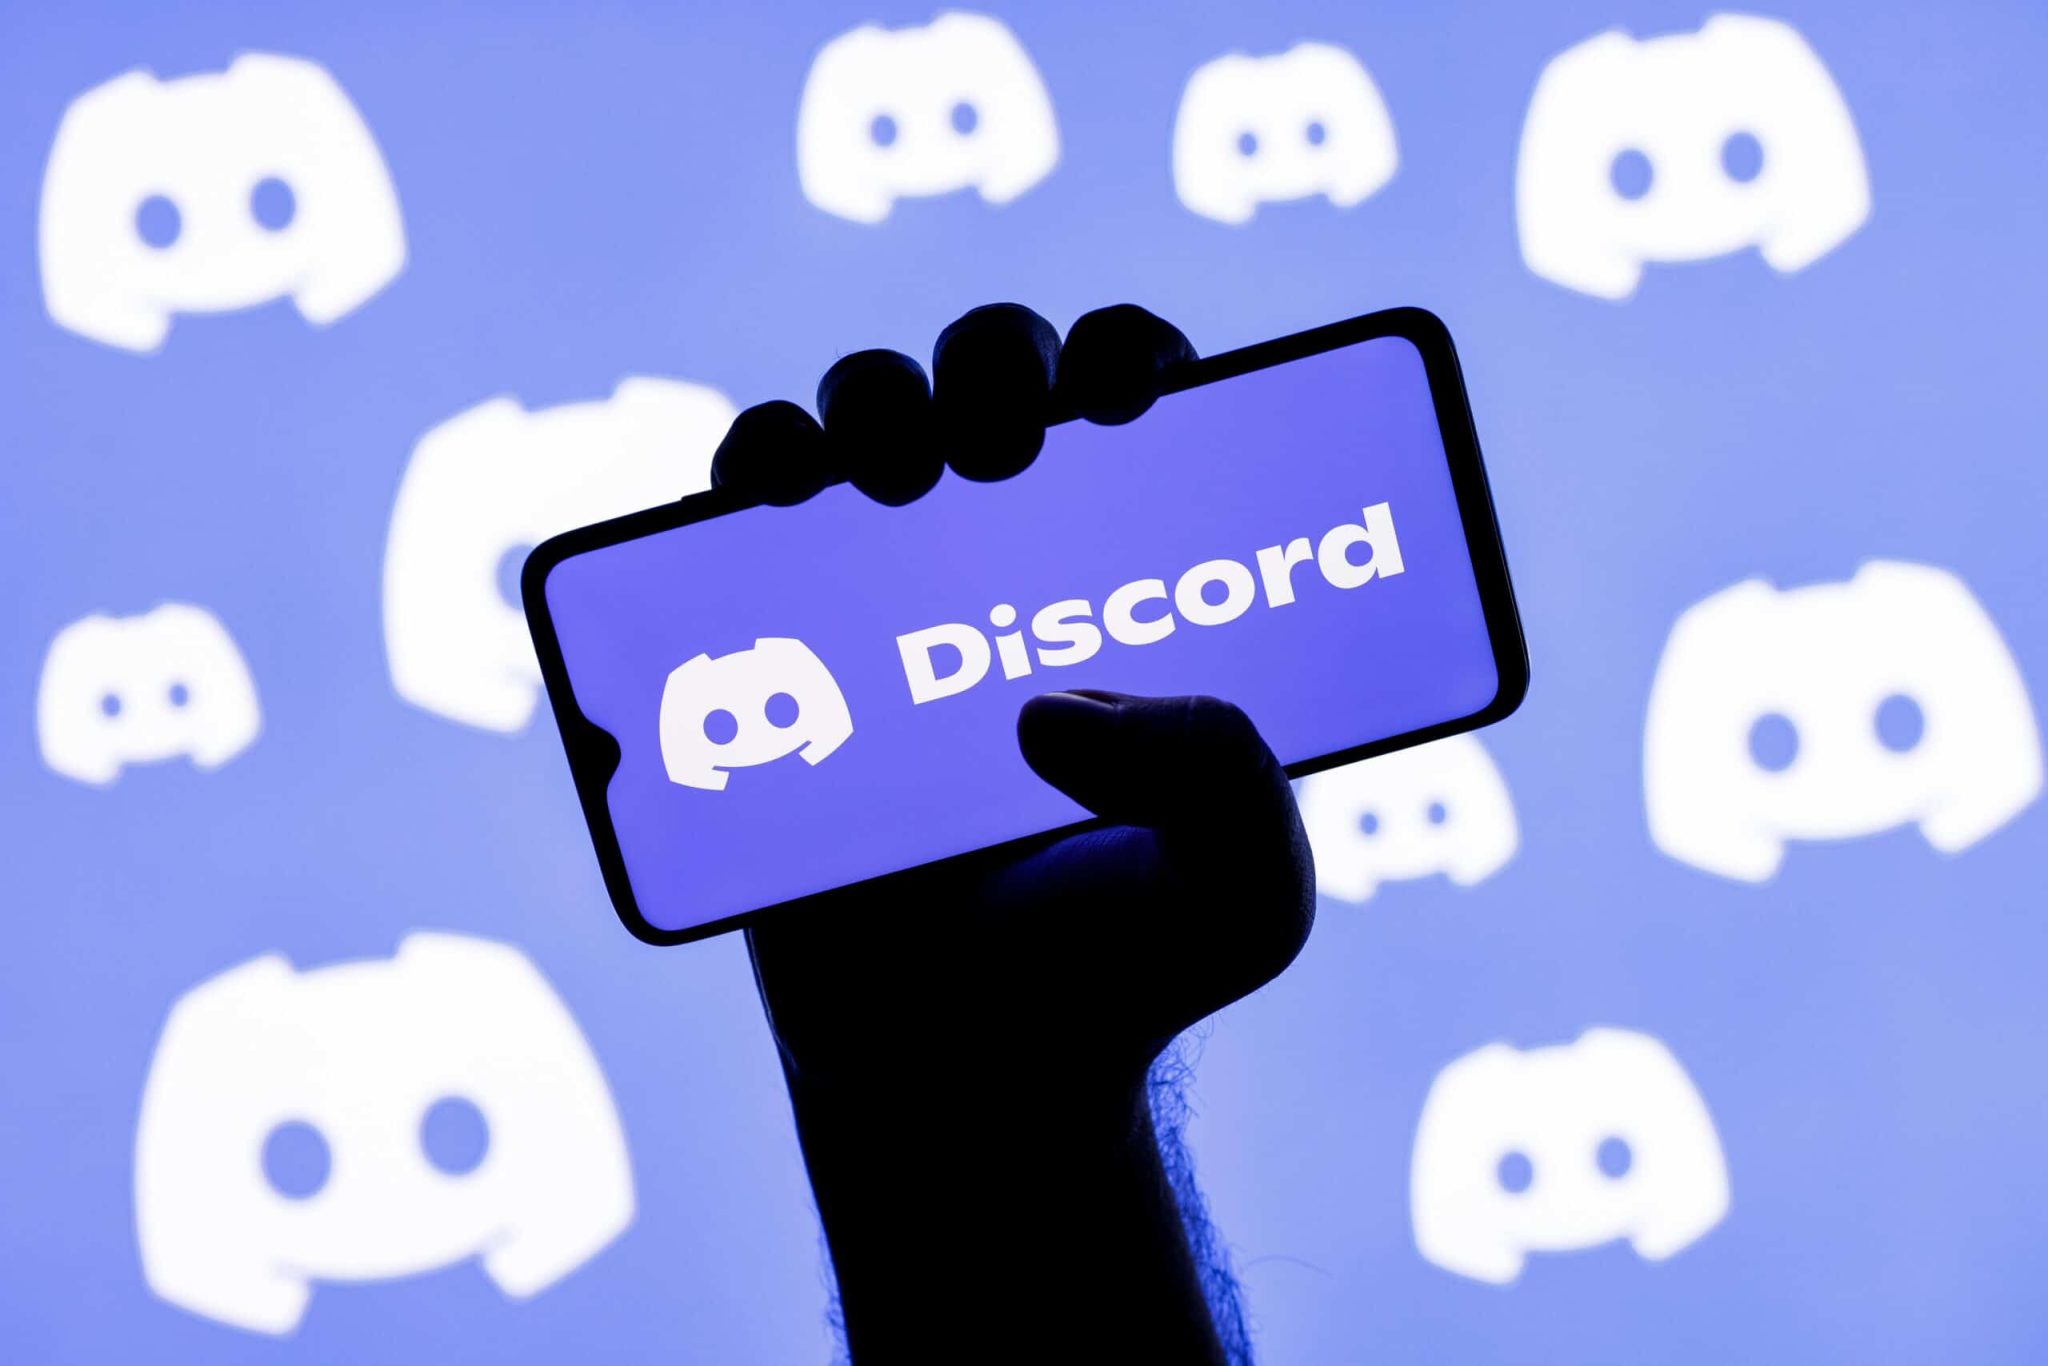 nsfw meaning in discord